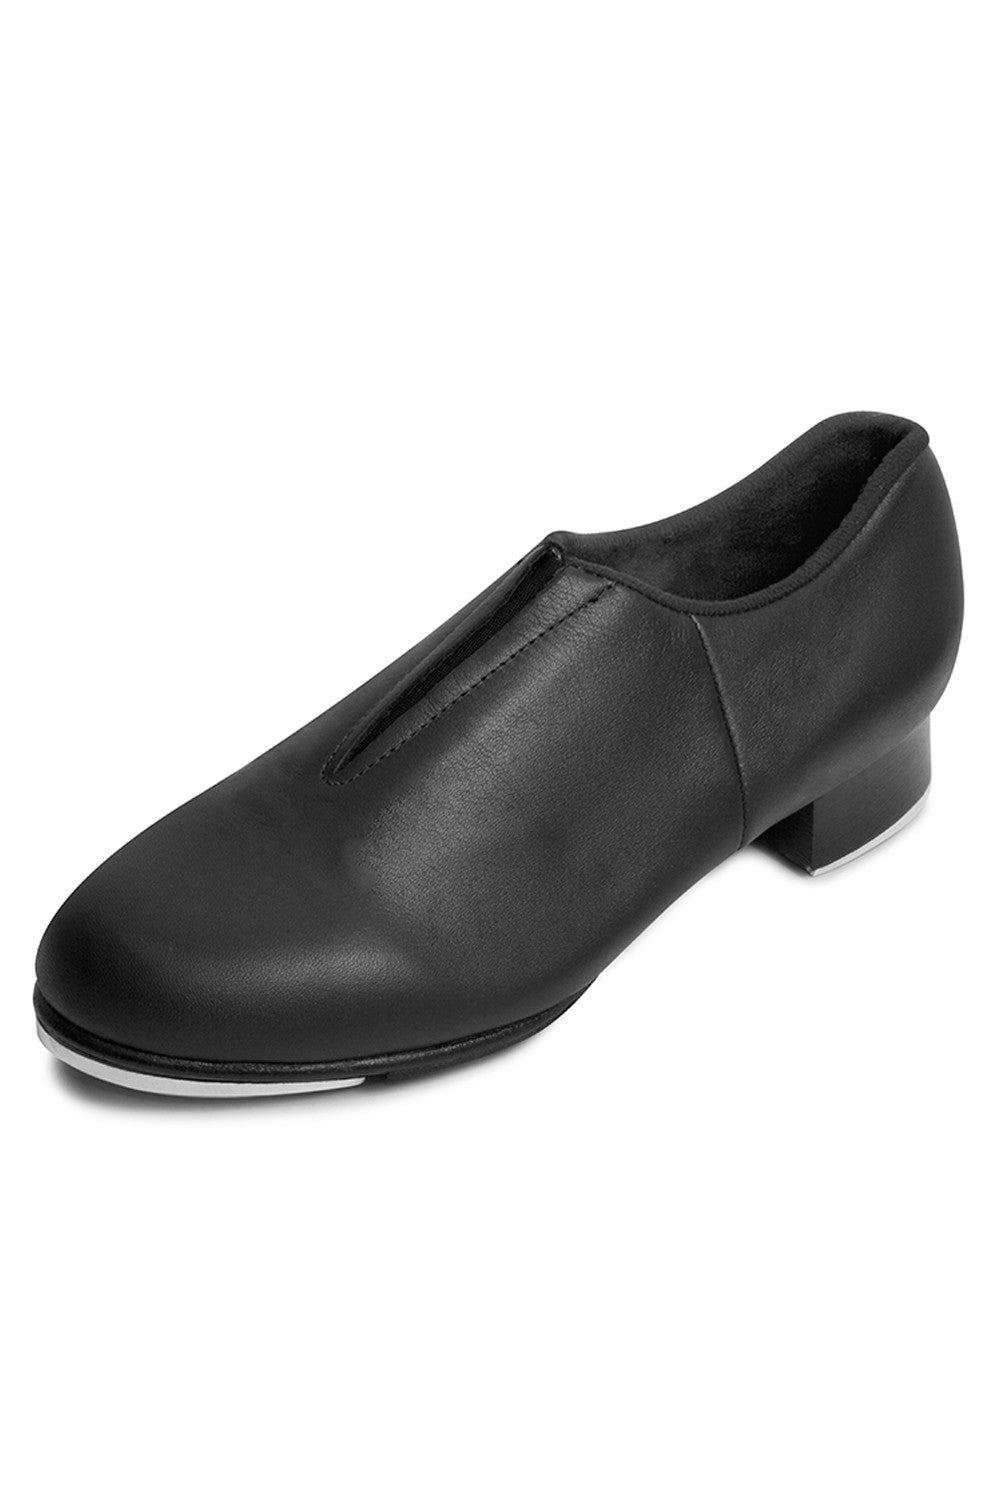 Bloch Adult Slip On Tap shoes